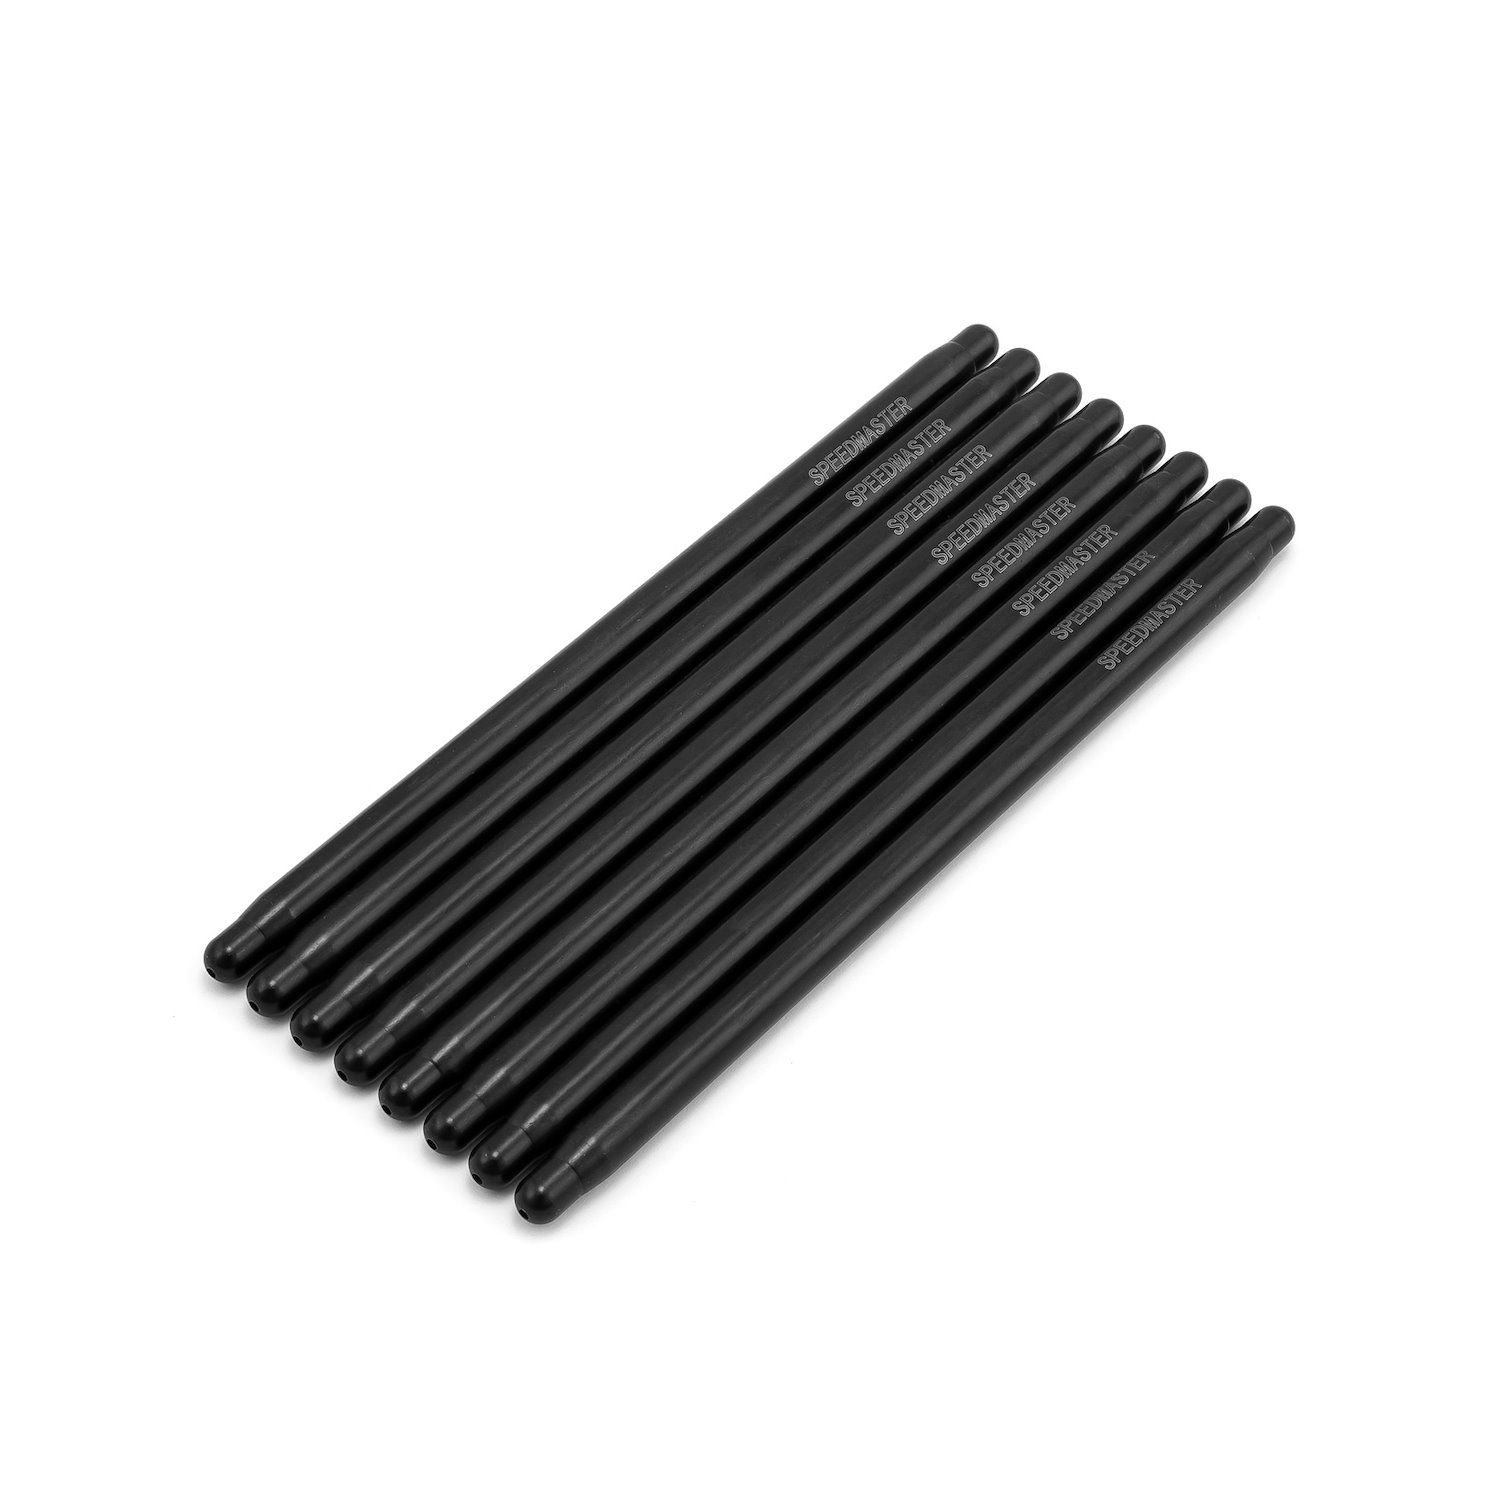 1-254-029 8.400 in. Chromoly Heat-Treated 3/8 in. 0.080 in. Wall DNA One-Piece Pushrods